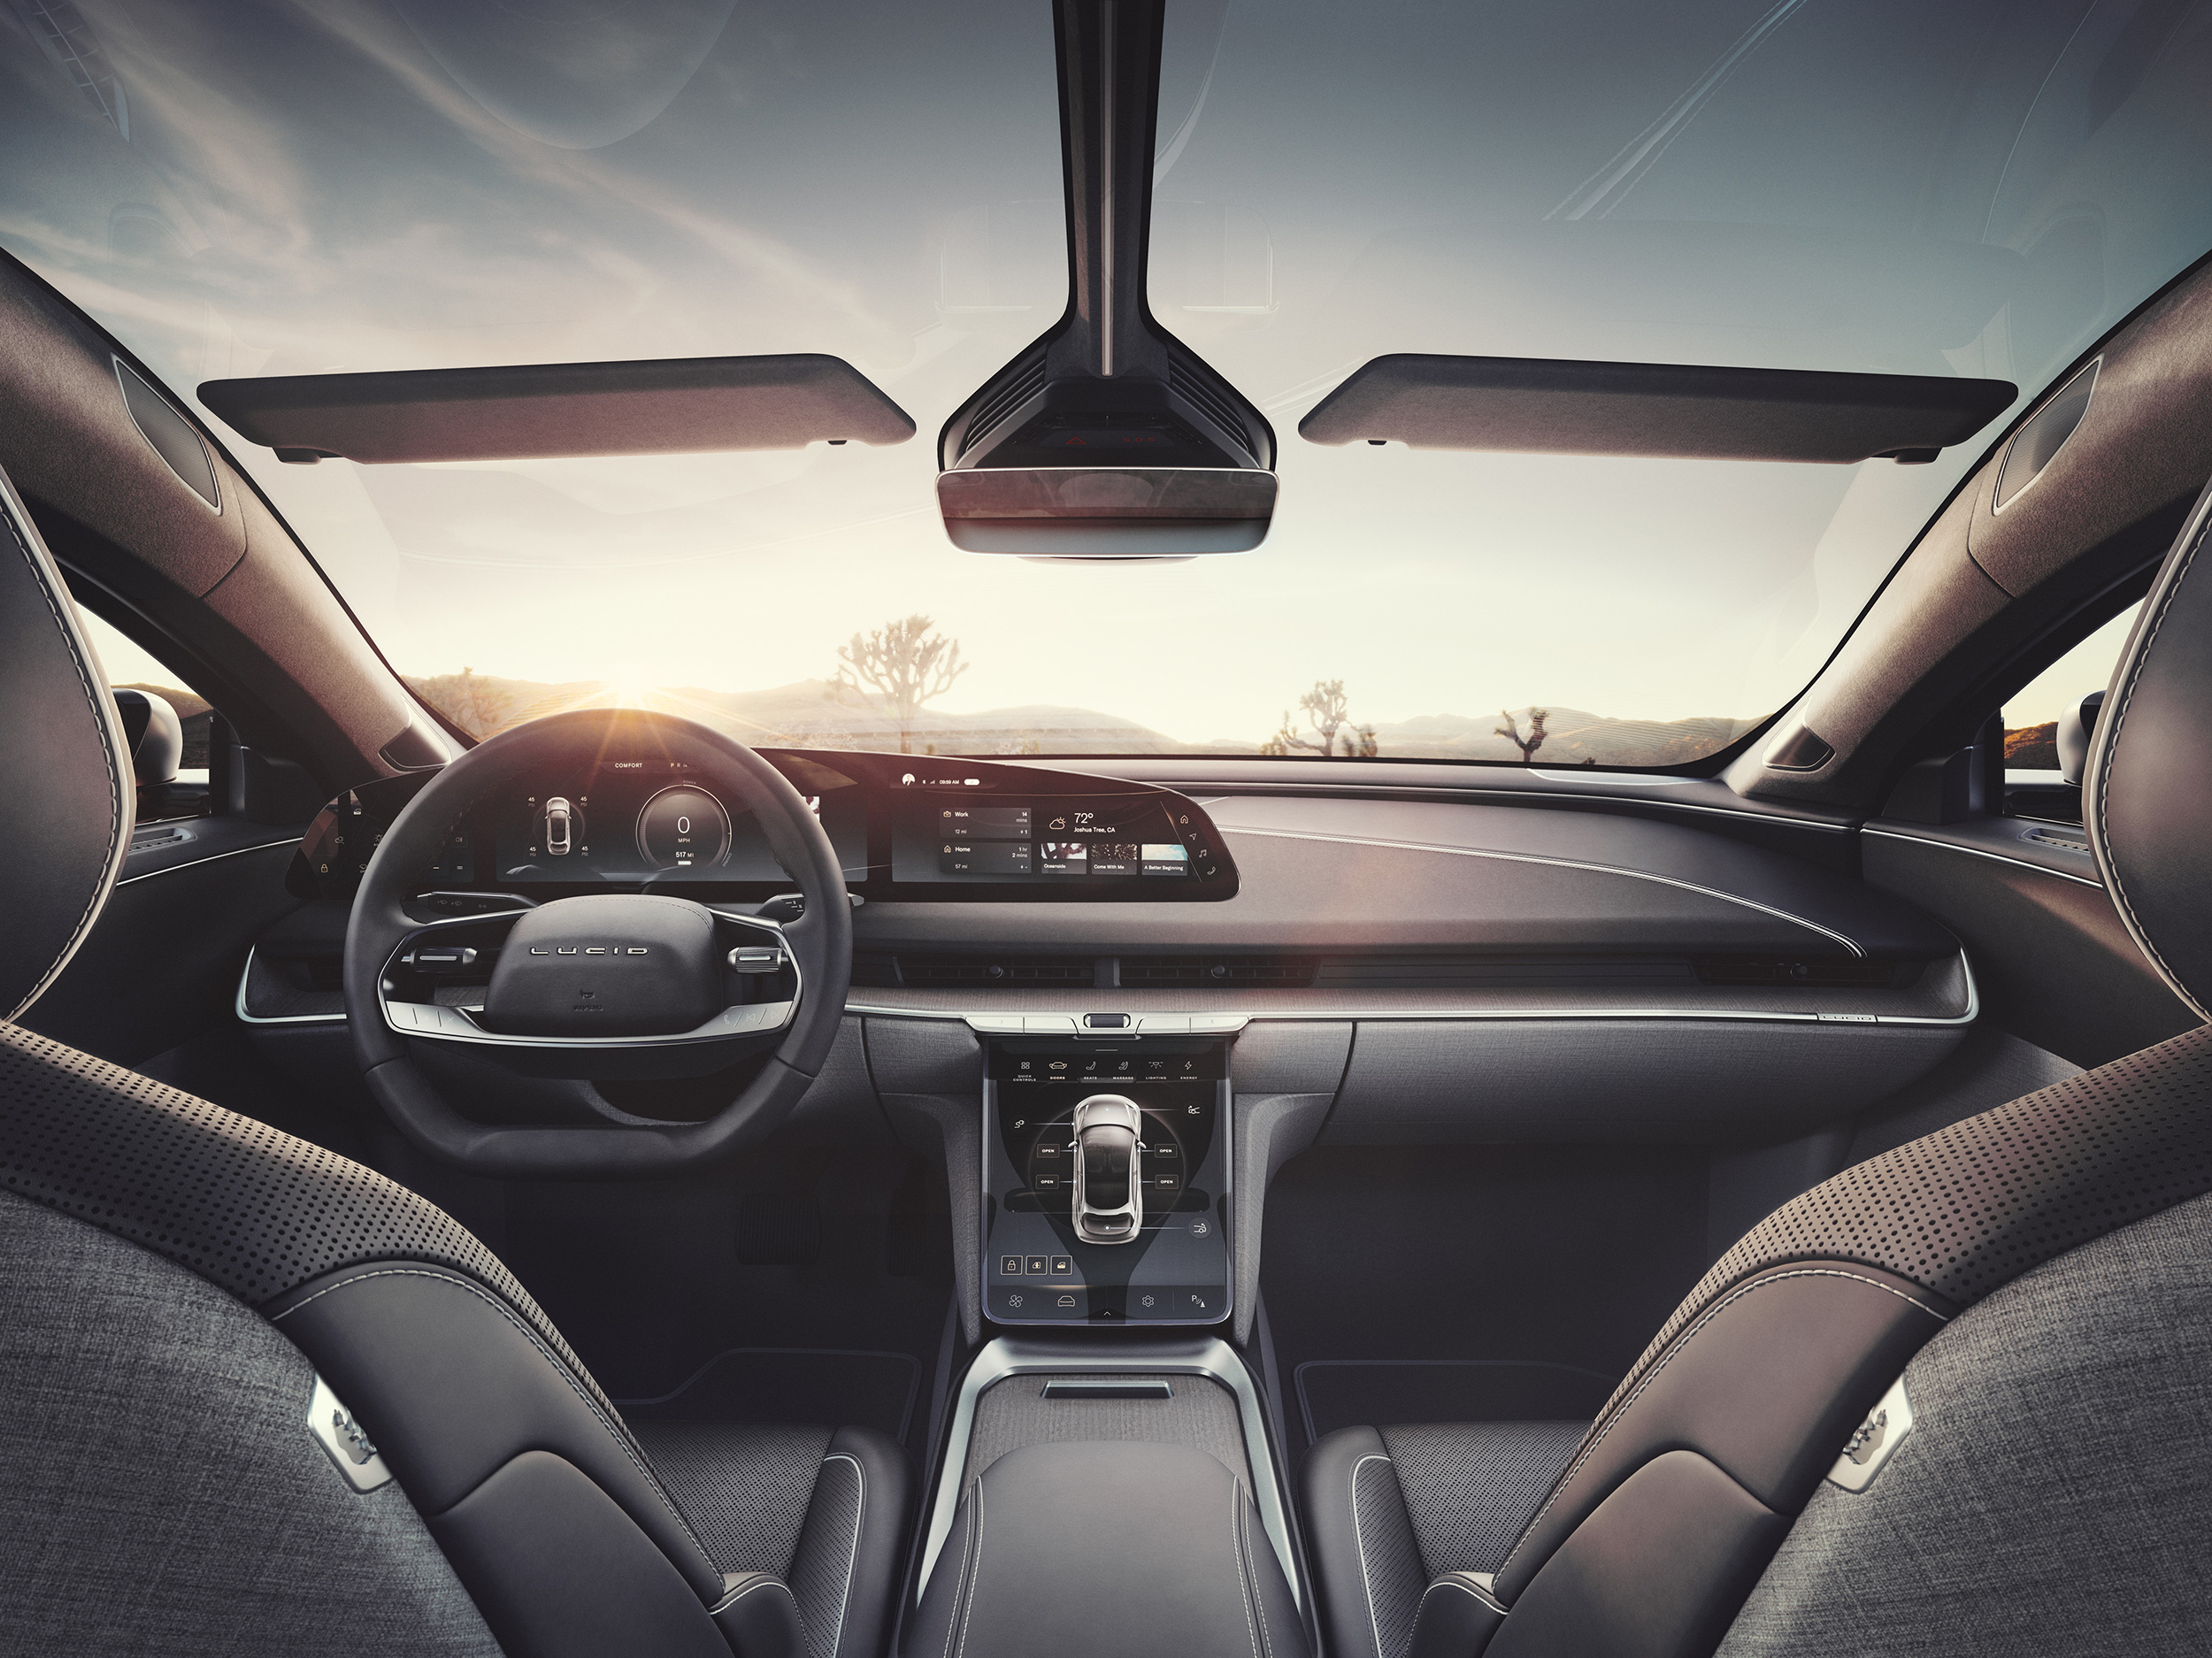 Lucid Motors Issues Recall For Glass Cockpit Instrument Panel For 1,117 Lucid Air EVs